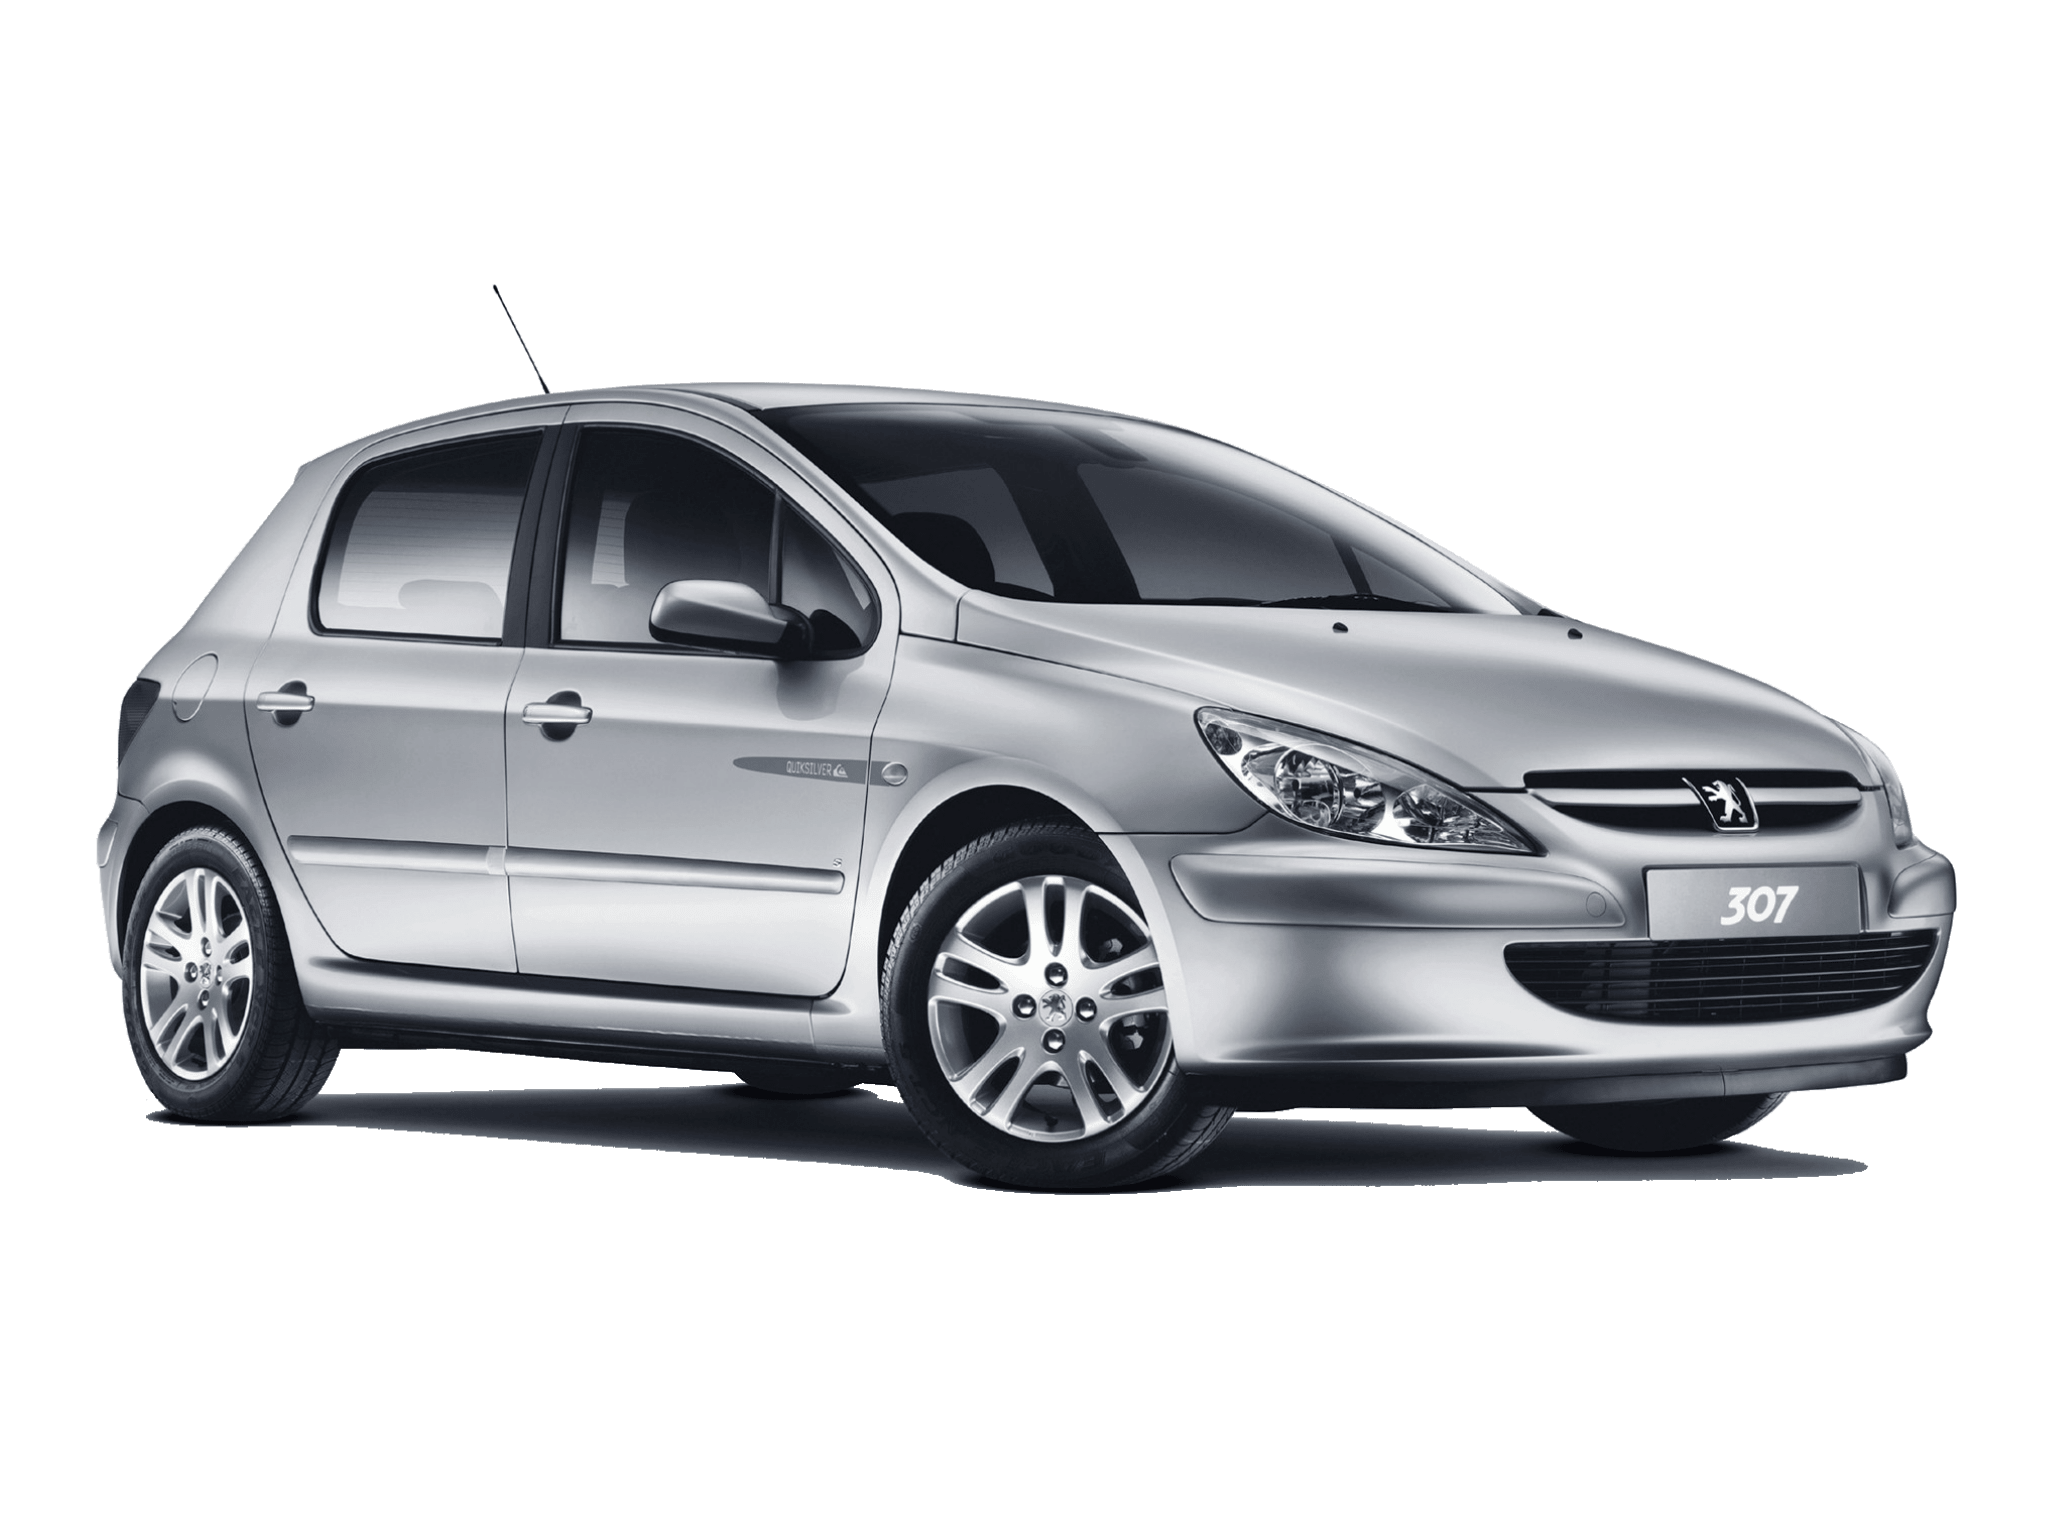 Peugeot 307: Most Up-to-Date Encyclopedia, News & Reviews